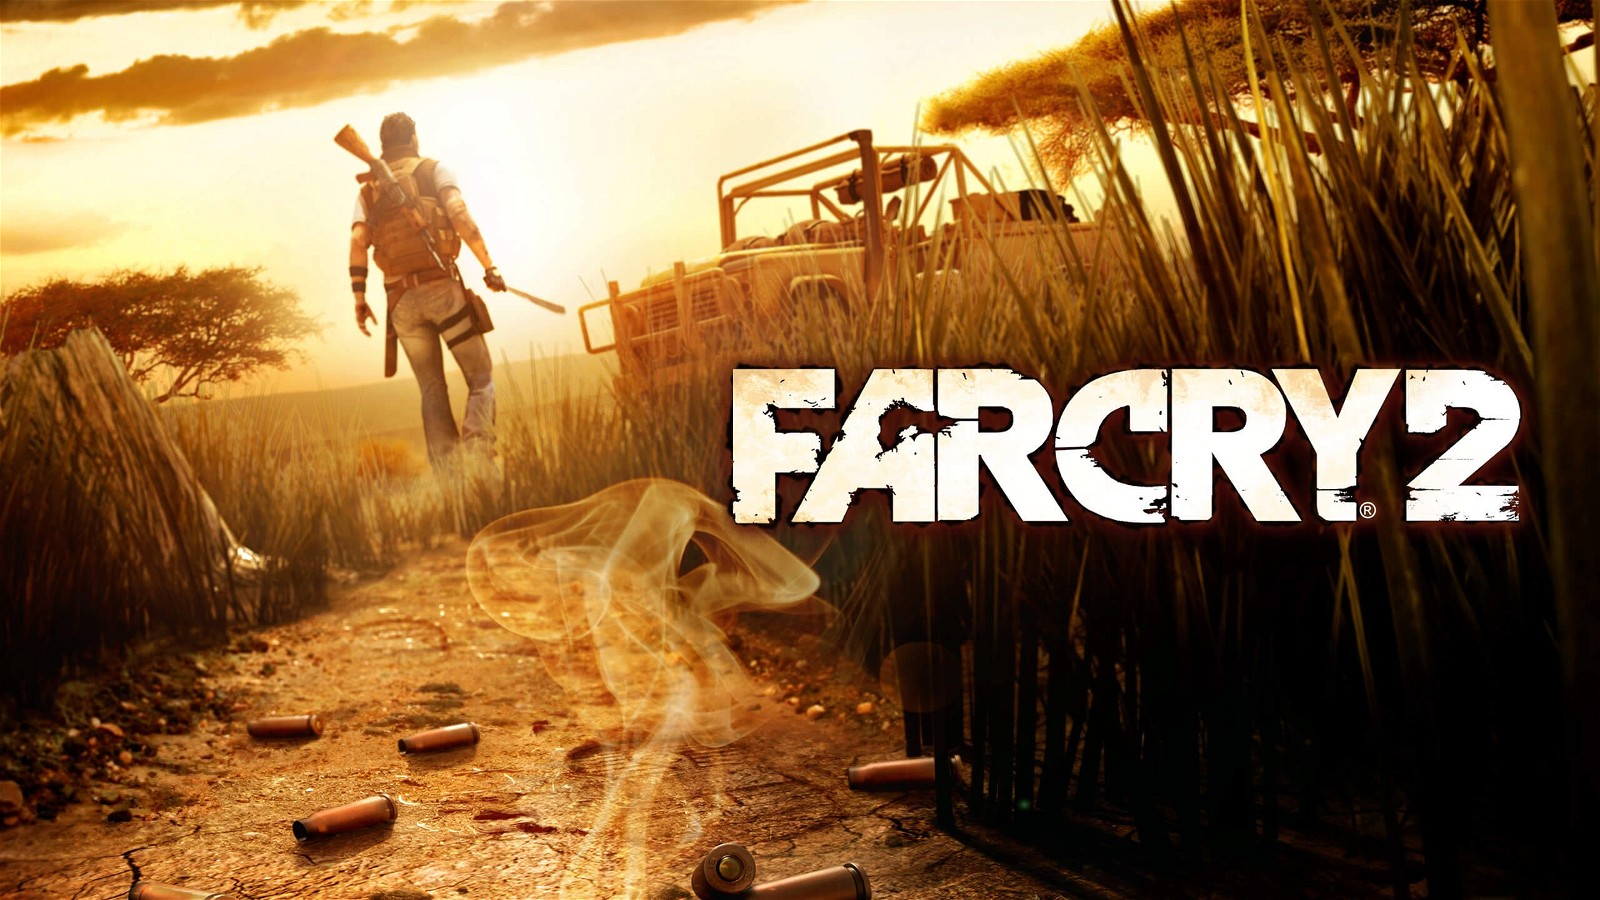 Far Cry 2 artwork featuring its protagonist.